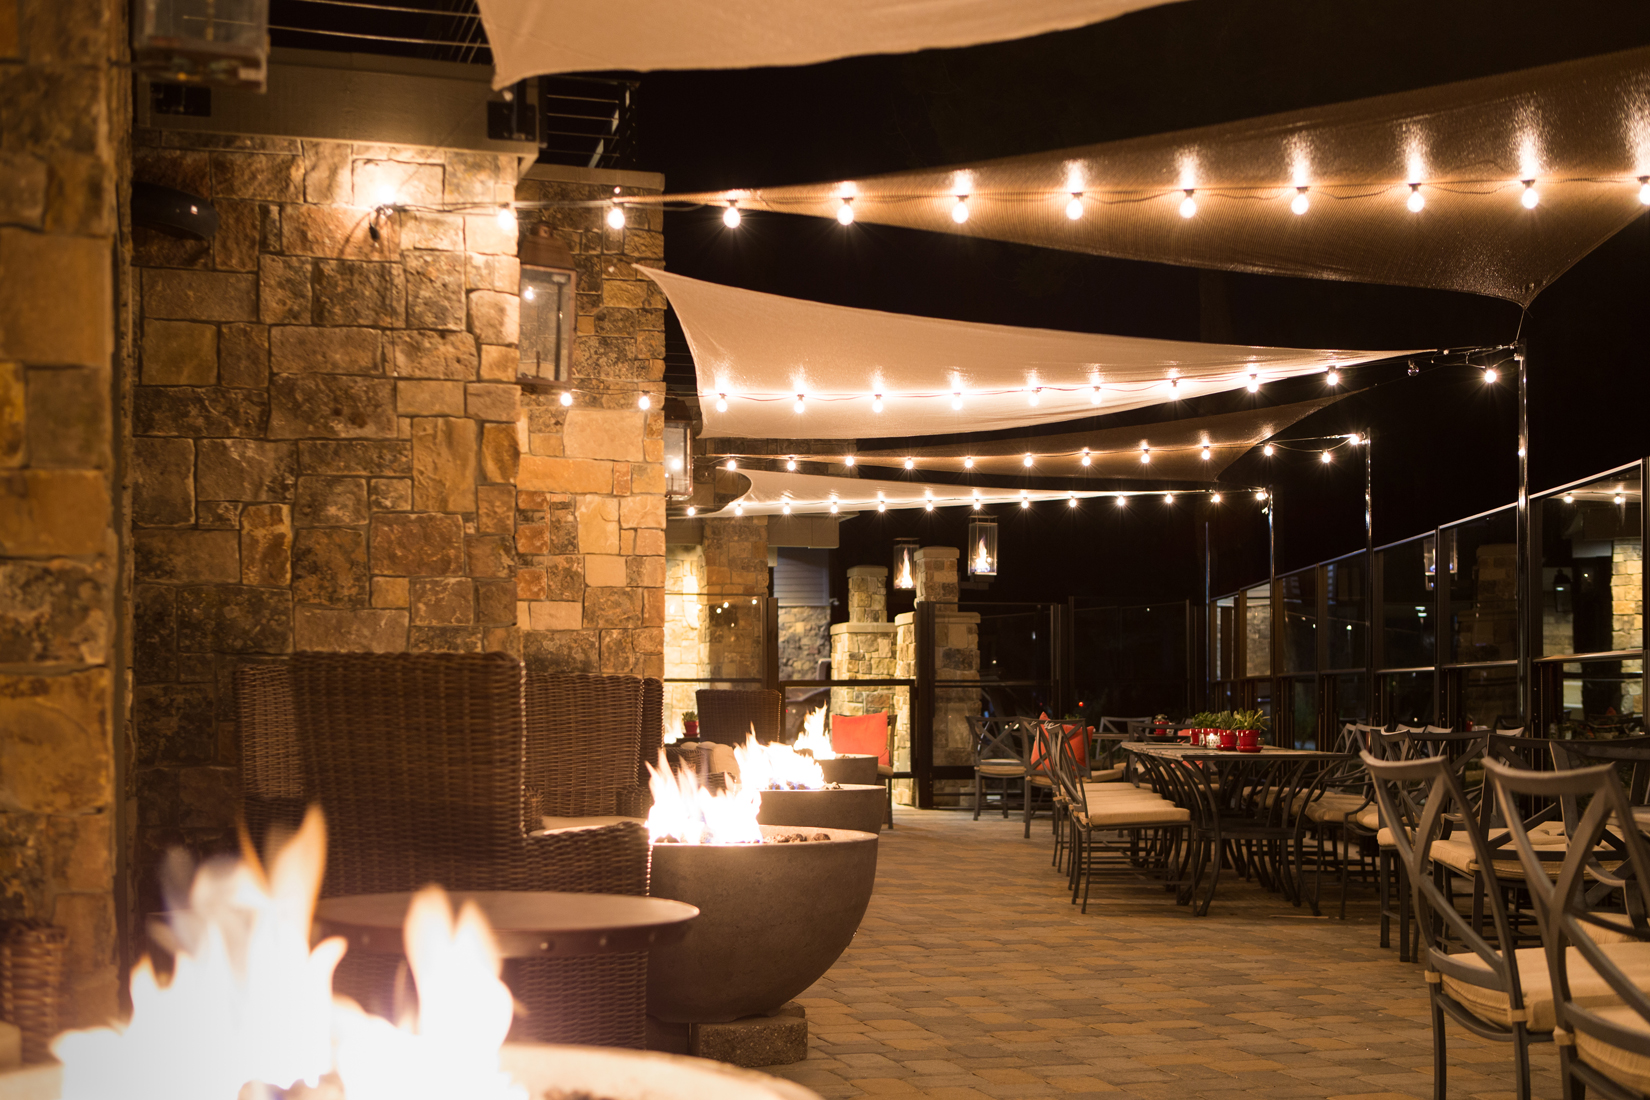 “Hotel tell-all” website Oyster praised The Landing Resort & Spa’s Jimmy’s restaurant deck with fire pits as one of many ways the boutique luxury hotel takes advantage of its prime Lake Tahoe setting.